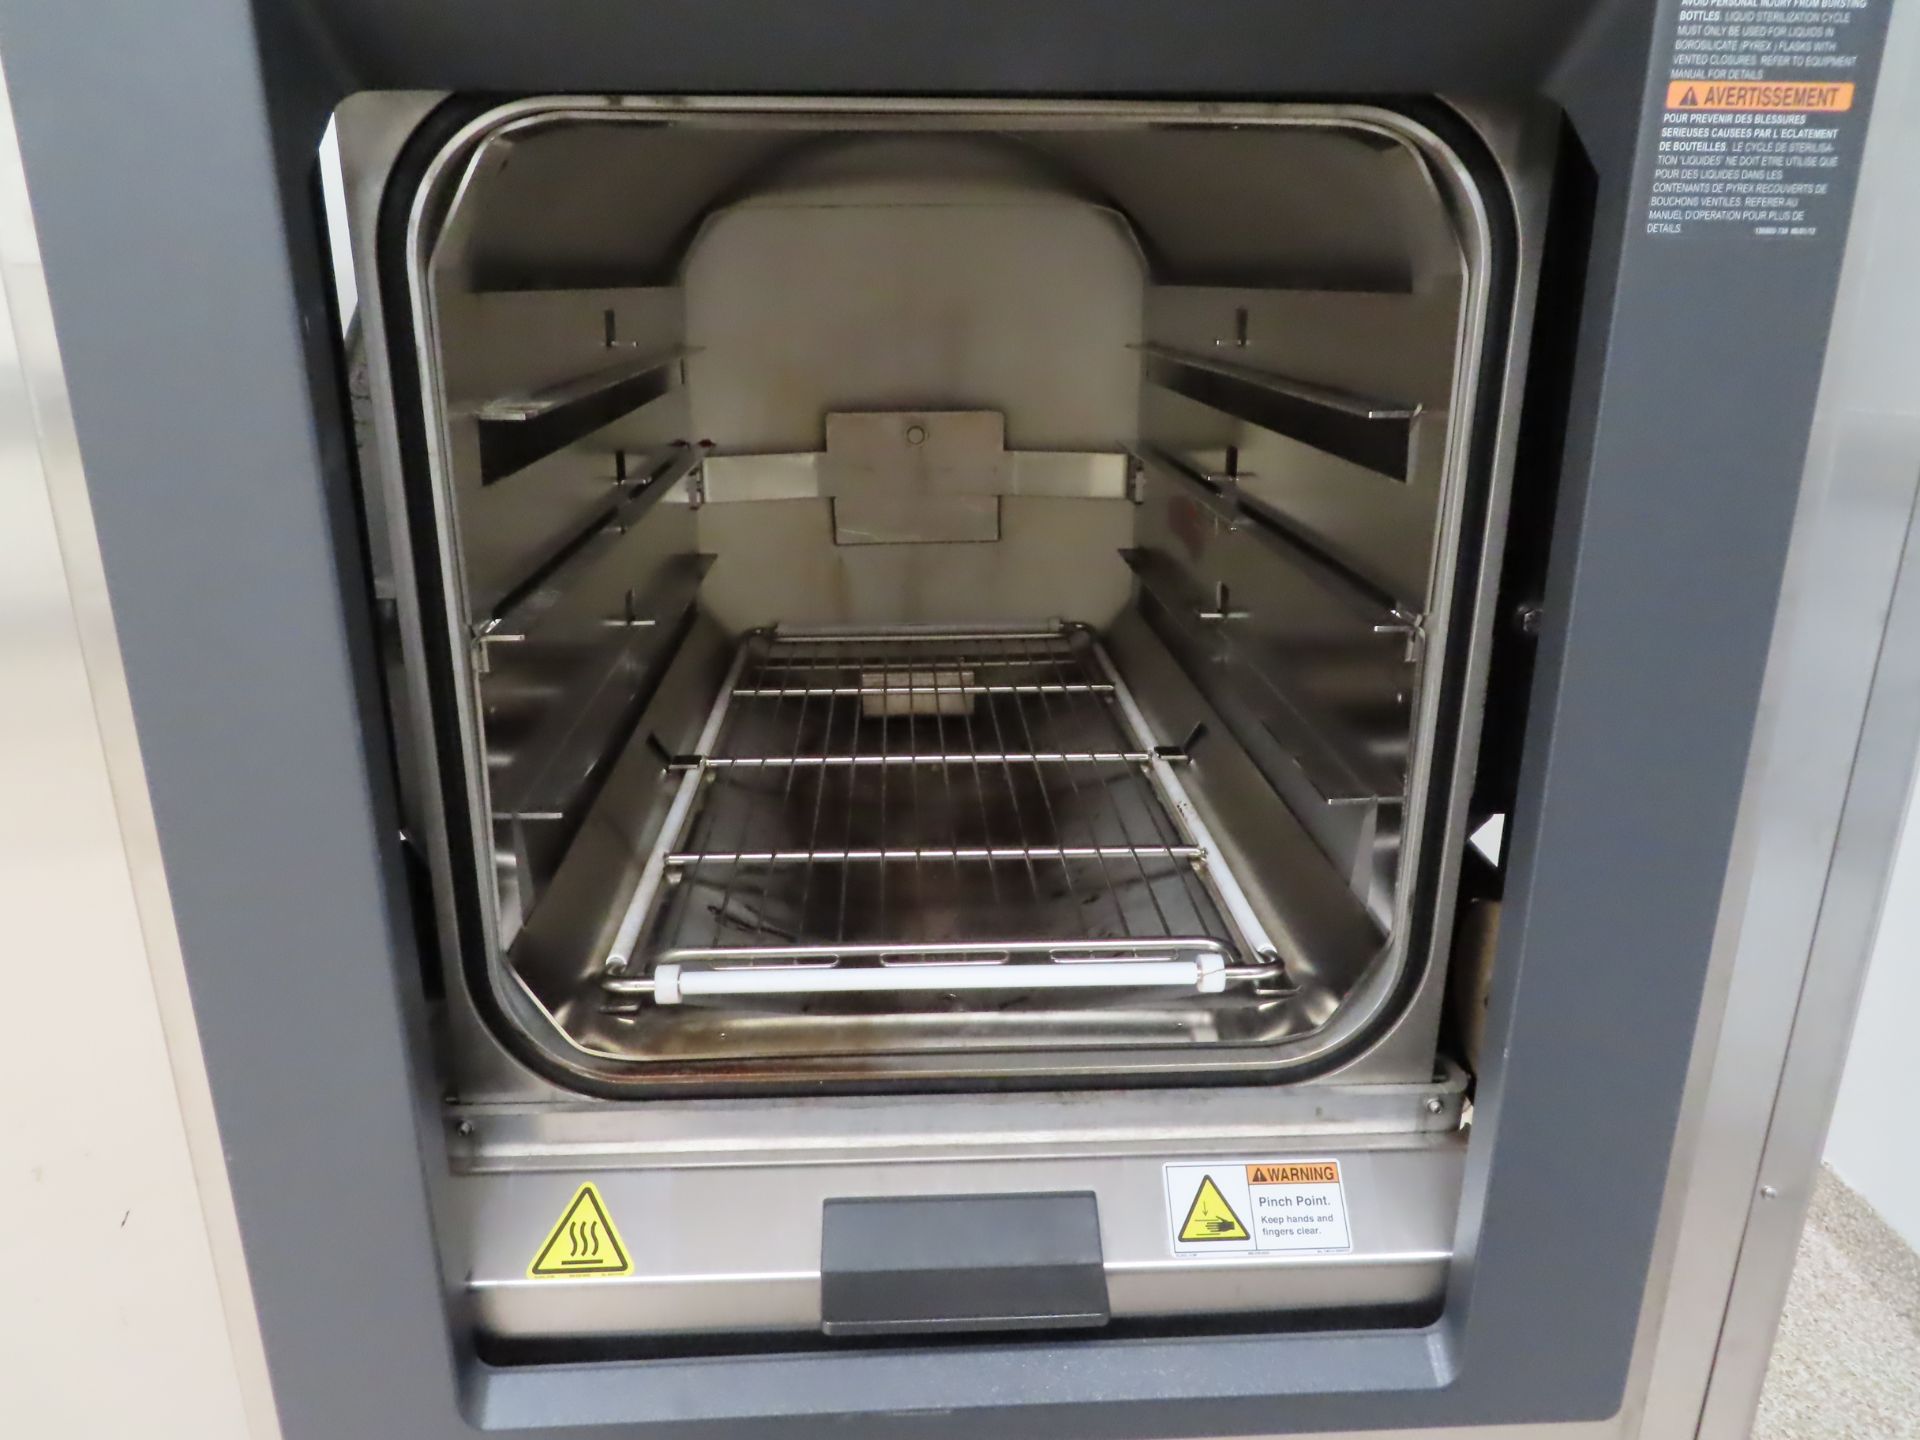 Steris Amsco Lab 250 autoclave, s/n 0317715-21, located B wing, 3rd floor, room 358C - Image 2 of 3